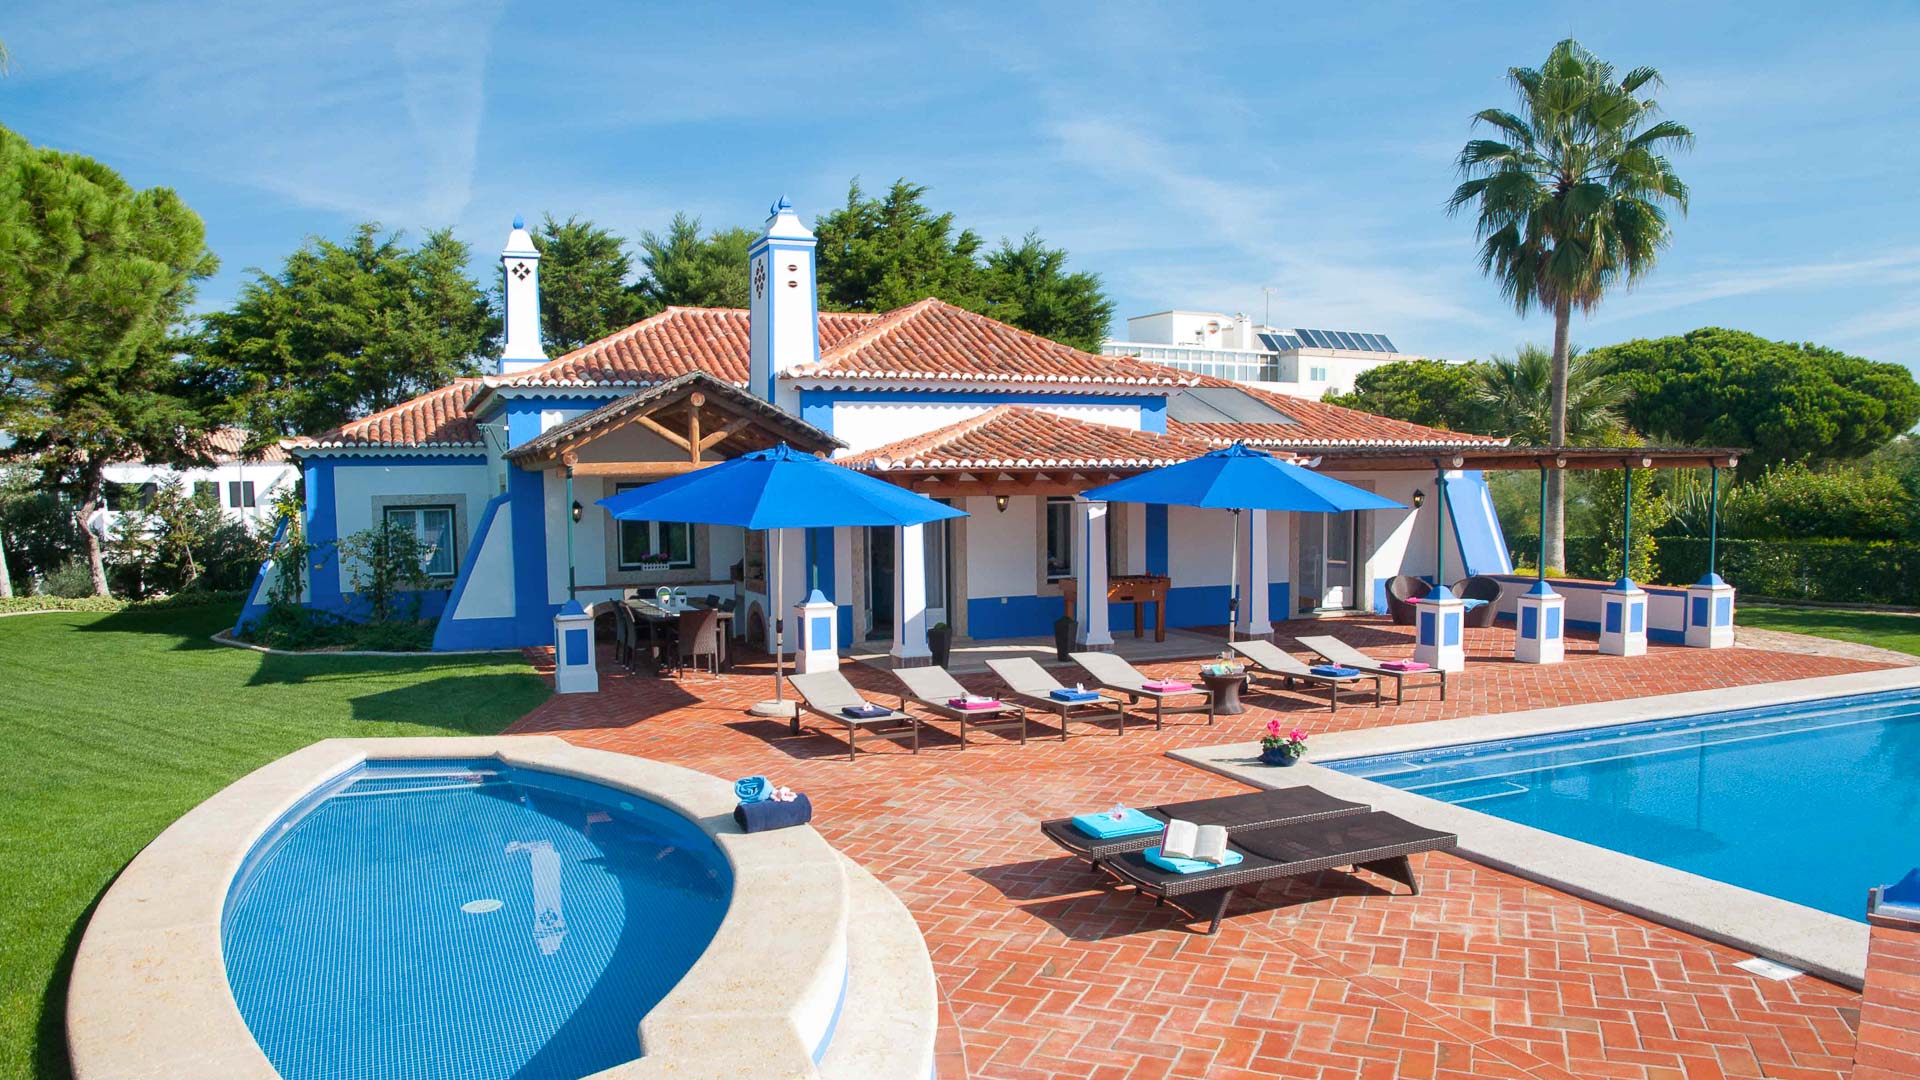 Relax and Unwind at this Immaculate 3-Bedroom Villa in Central Algarve